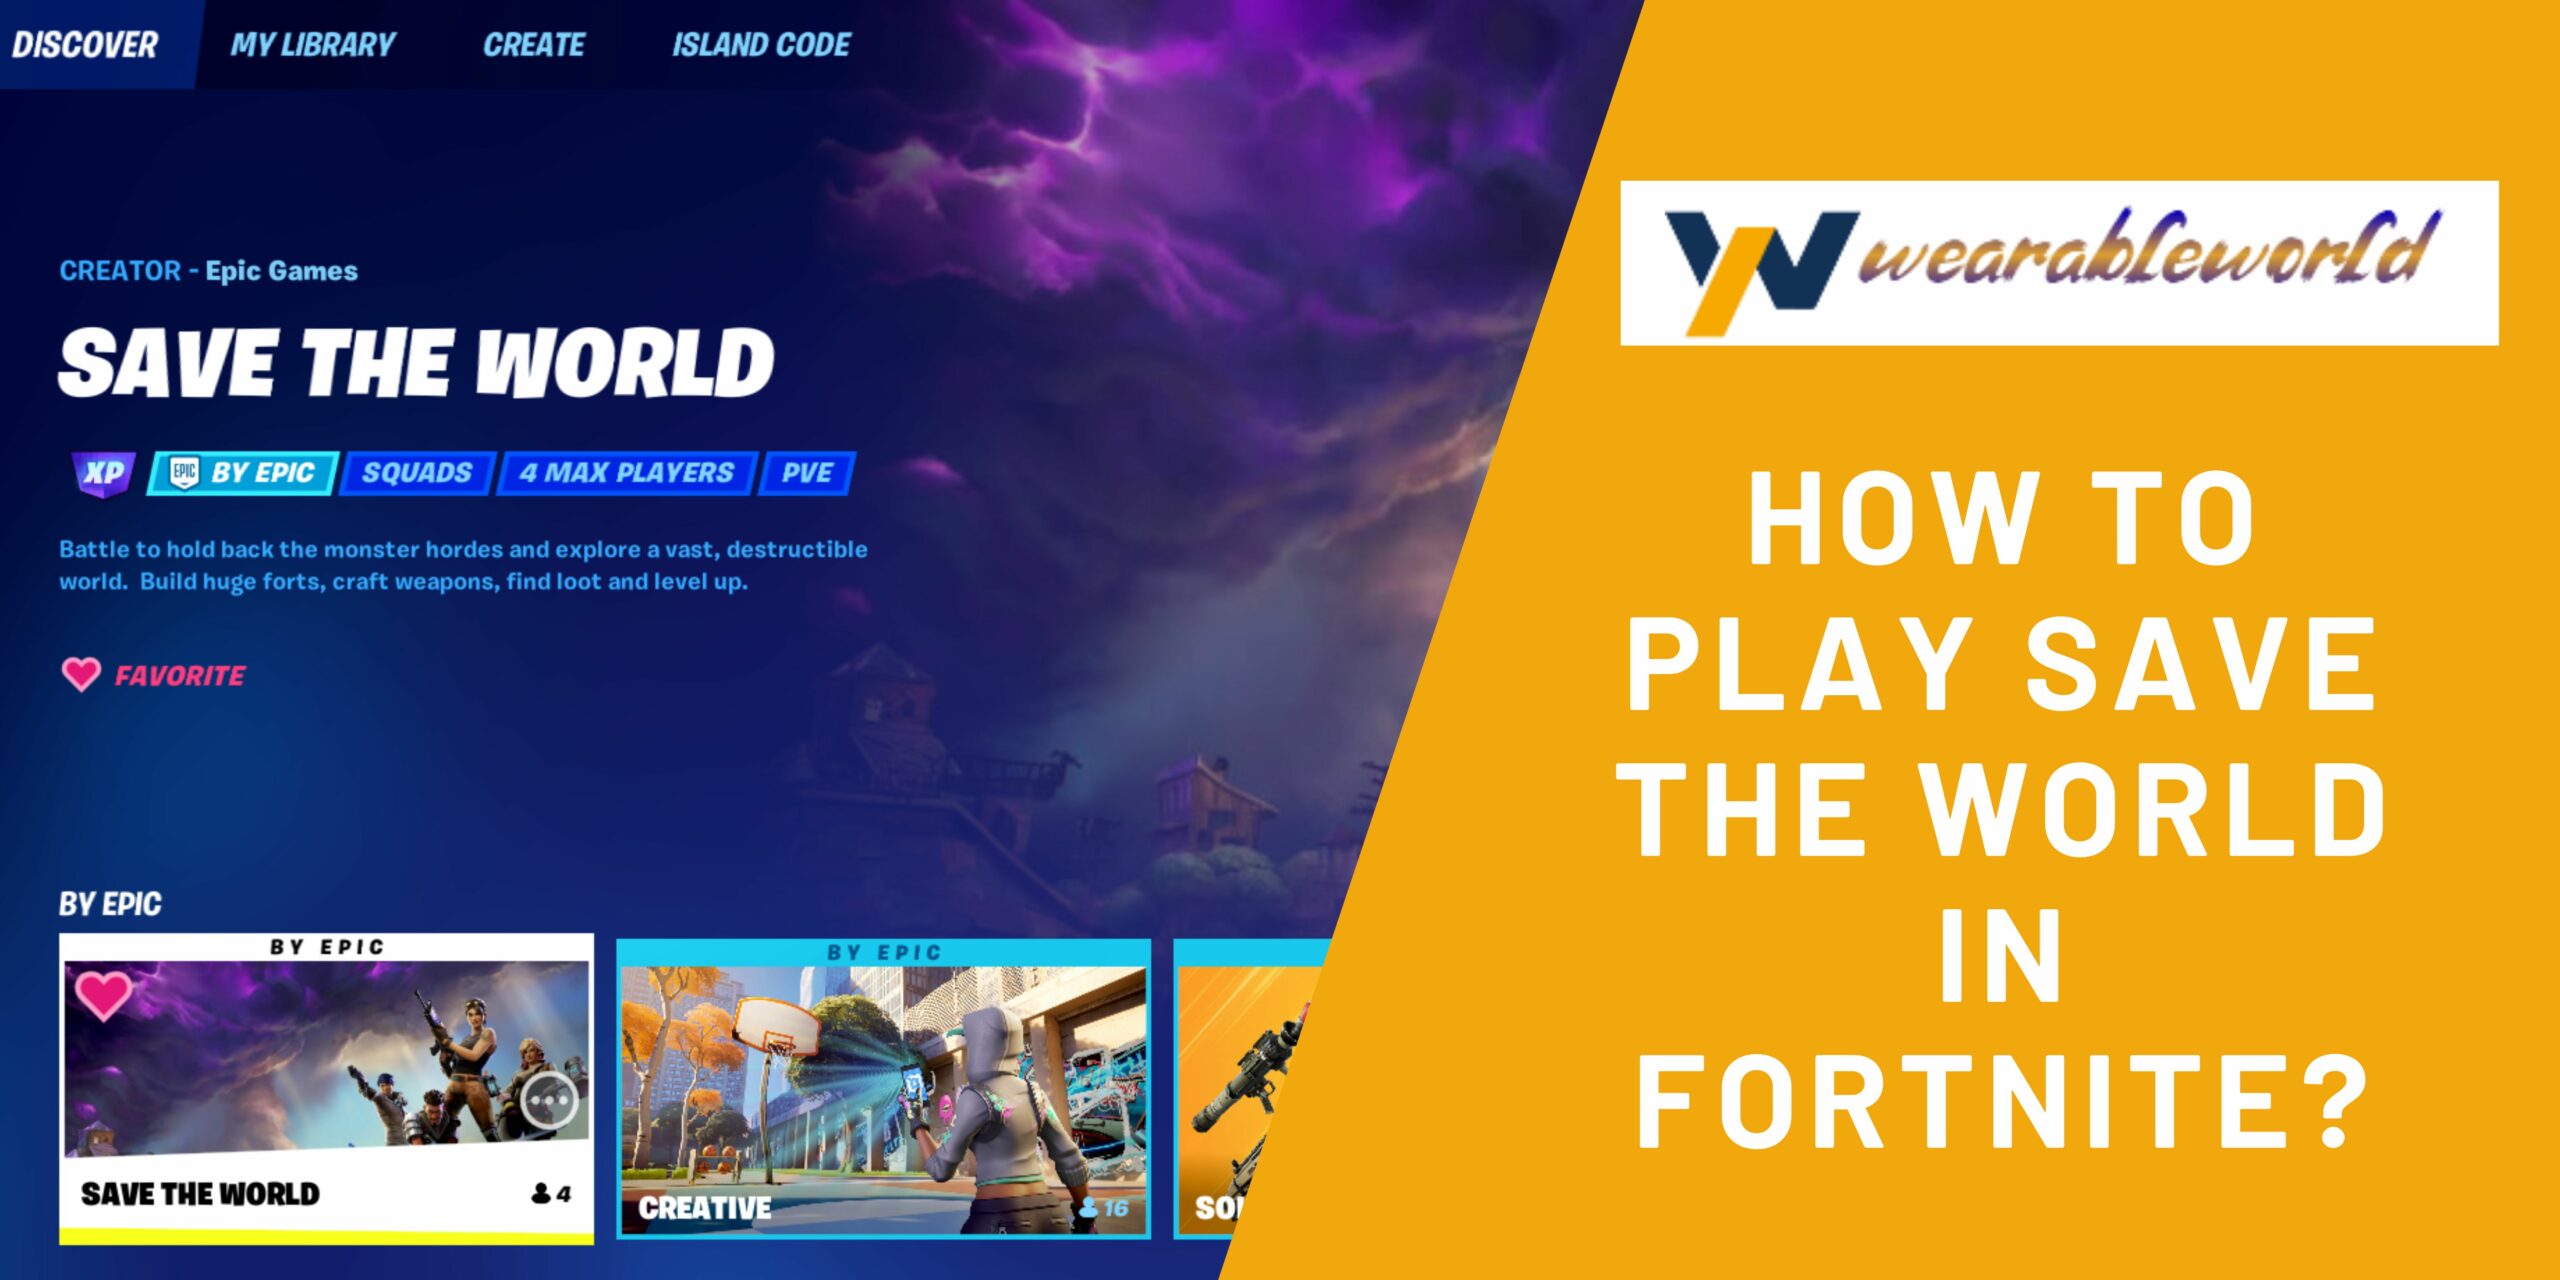 How to Play Save the World in Fortnite